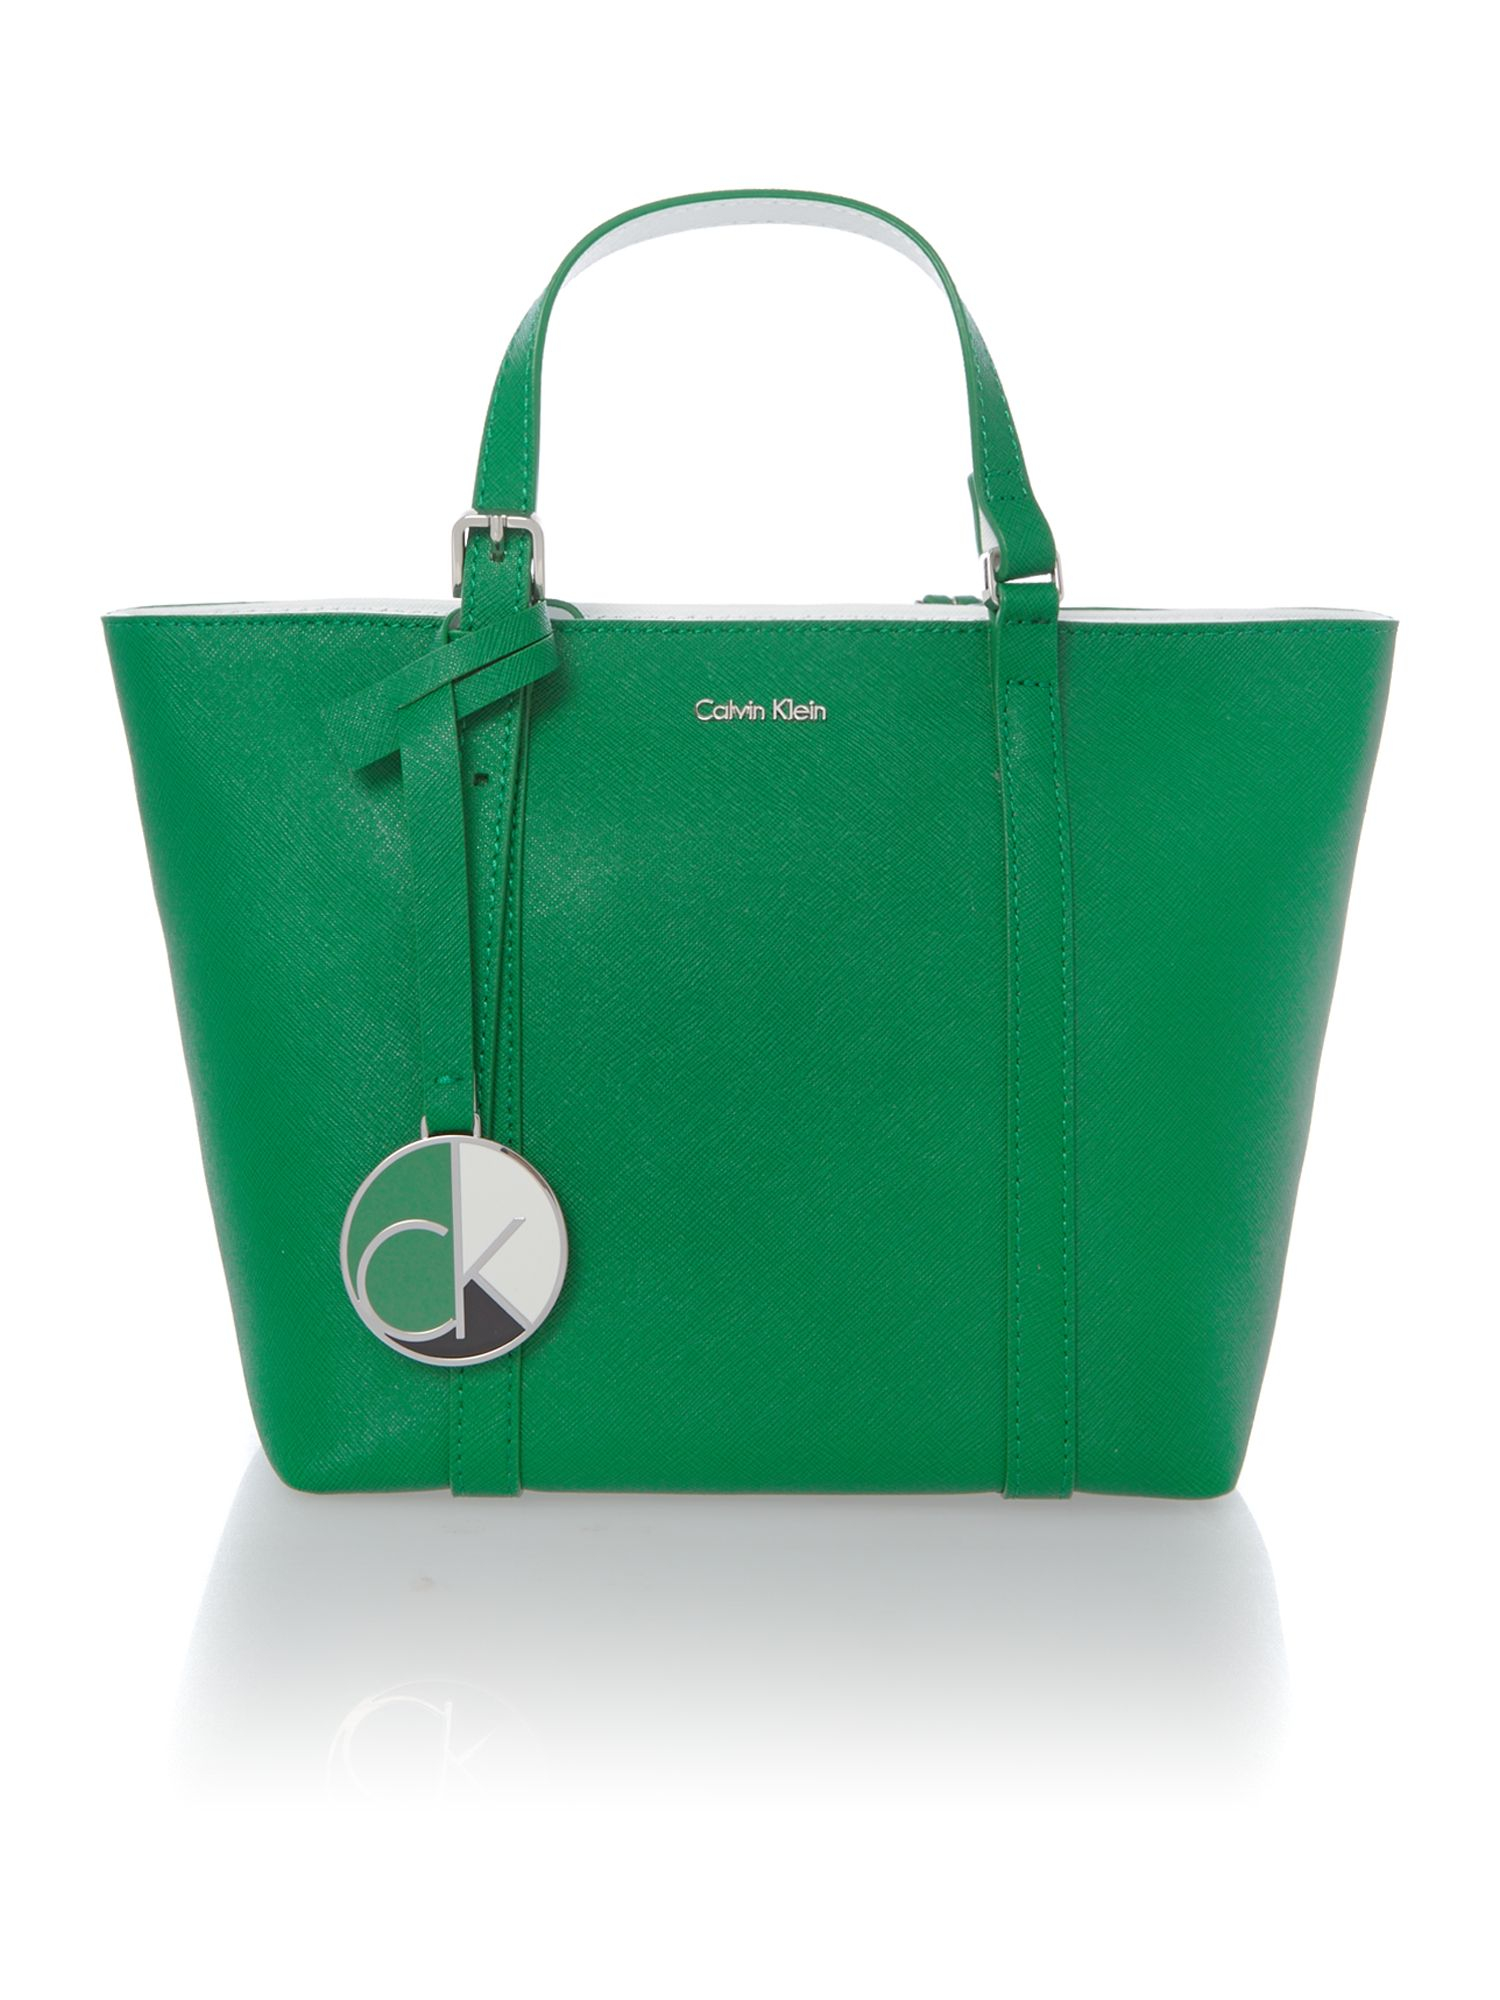 Calvin klein Sofie Green Small Tote Bag in Green | Lyst